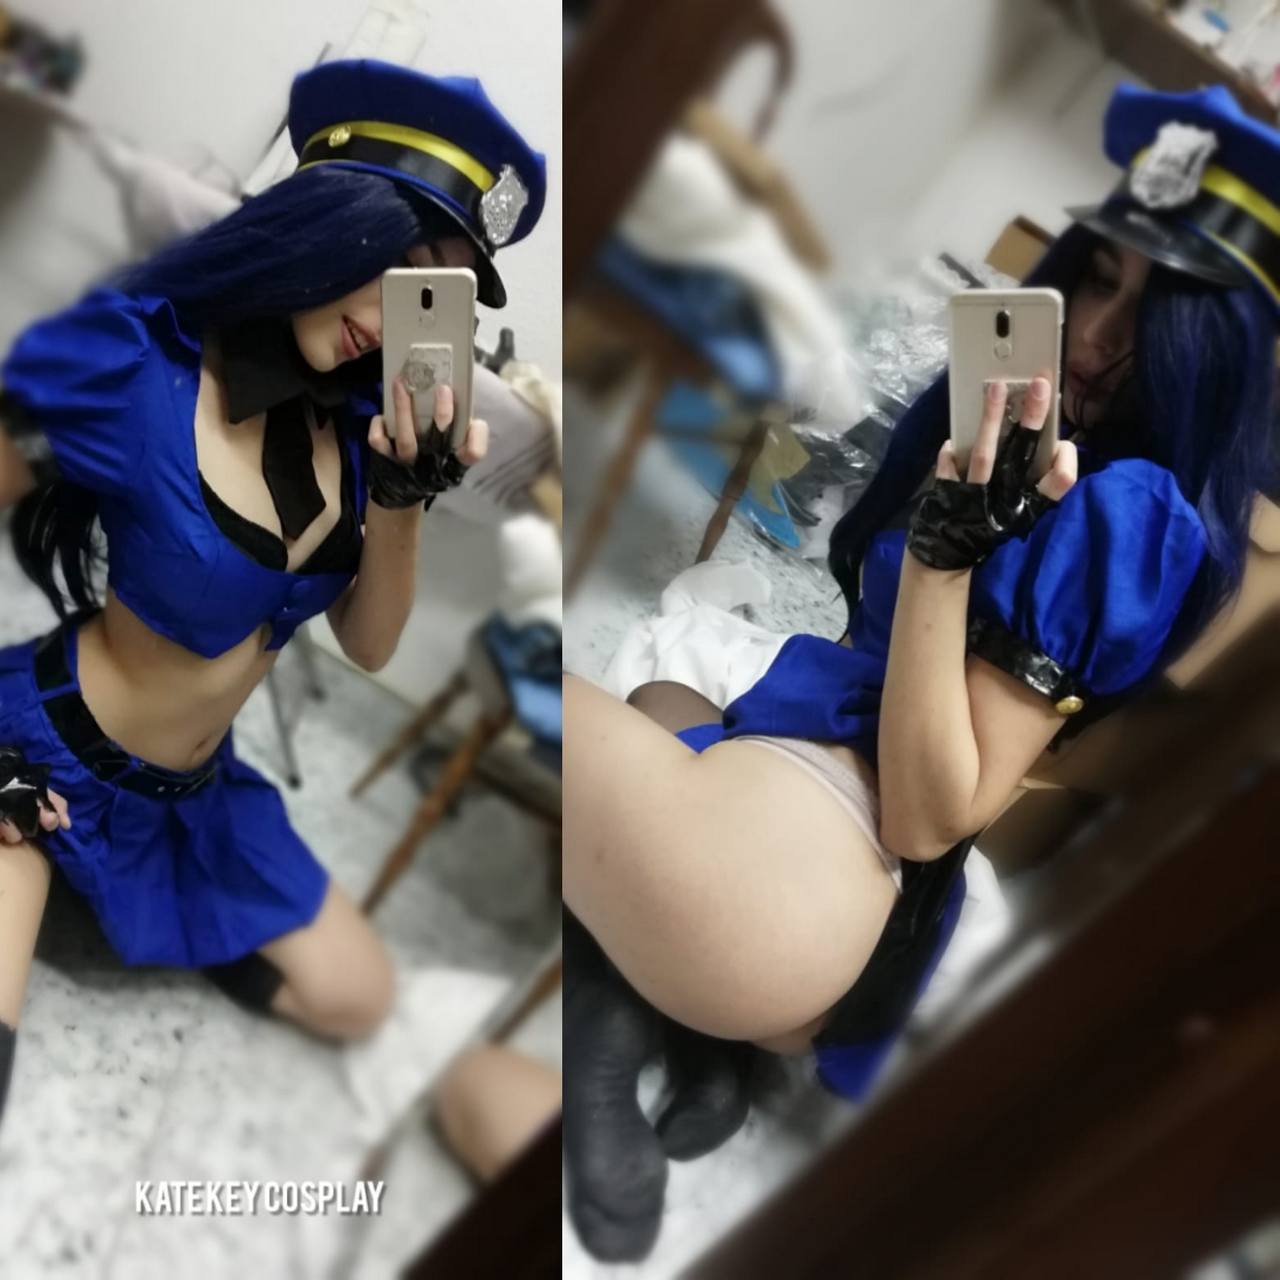 Officer Caitlyn From League Of Legends By Kate Ke